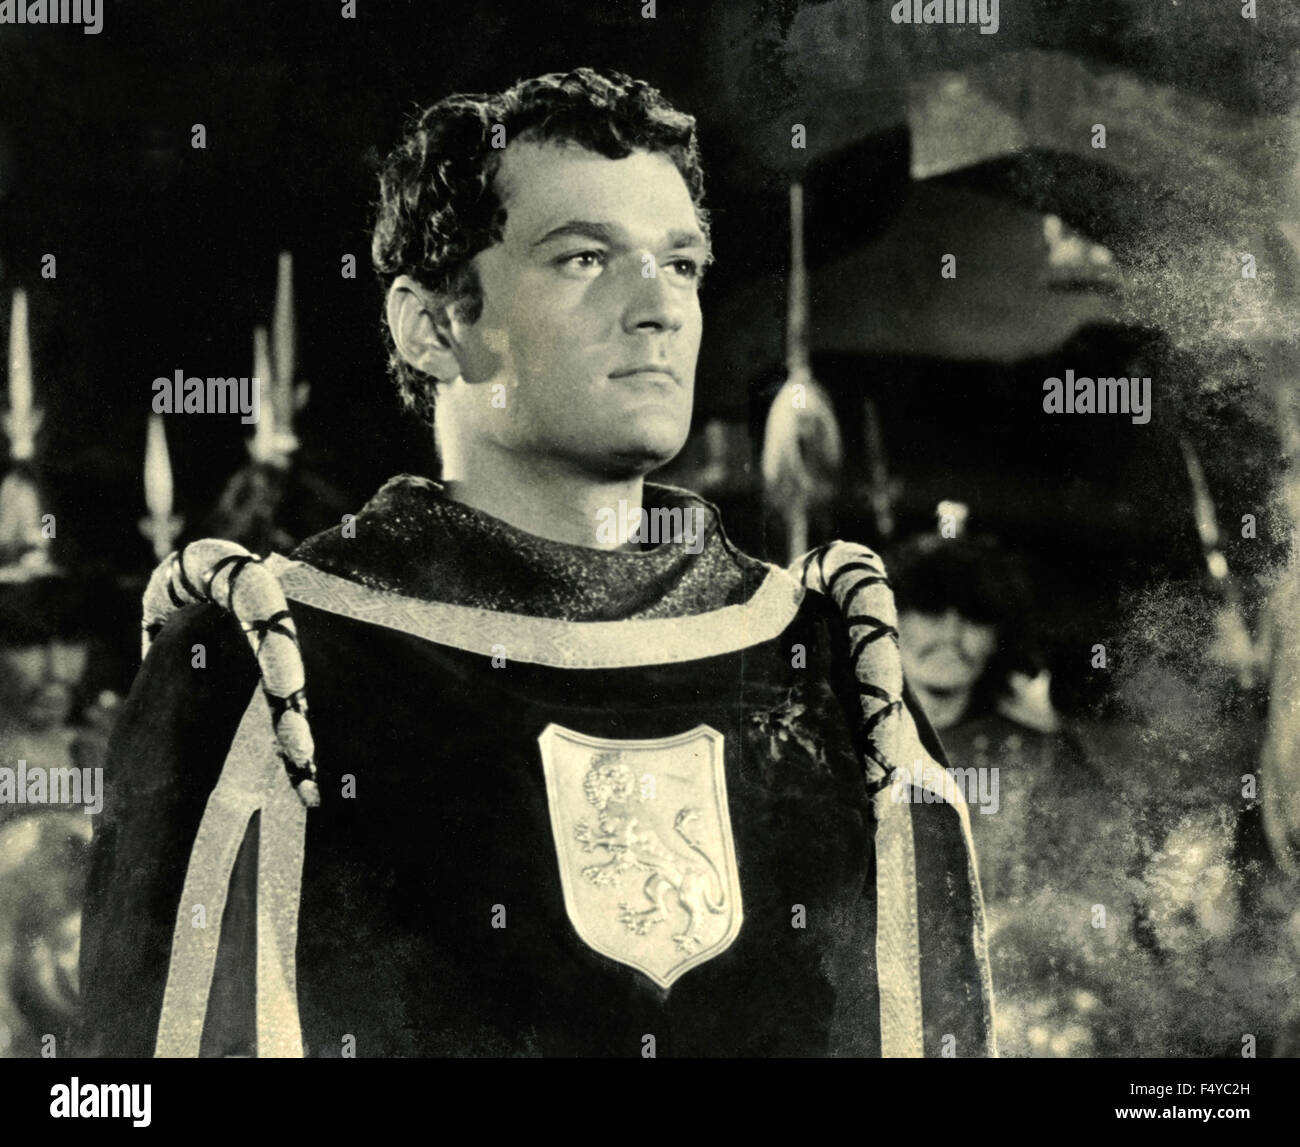 The French actor Jean Claudio in a scene from the film "The Lancers blacks  Stock Photo - Alamy